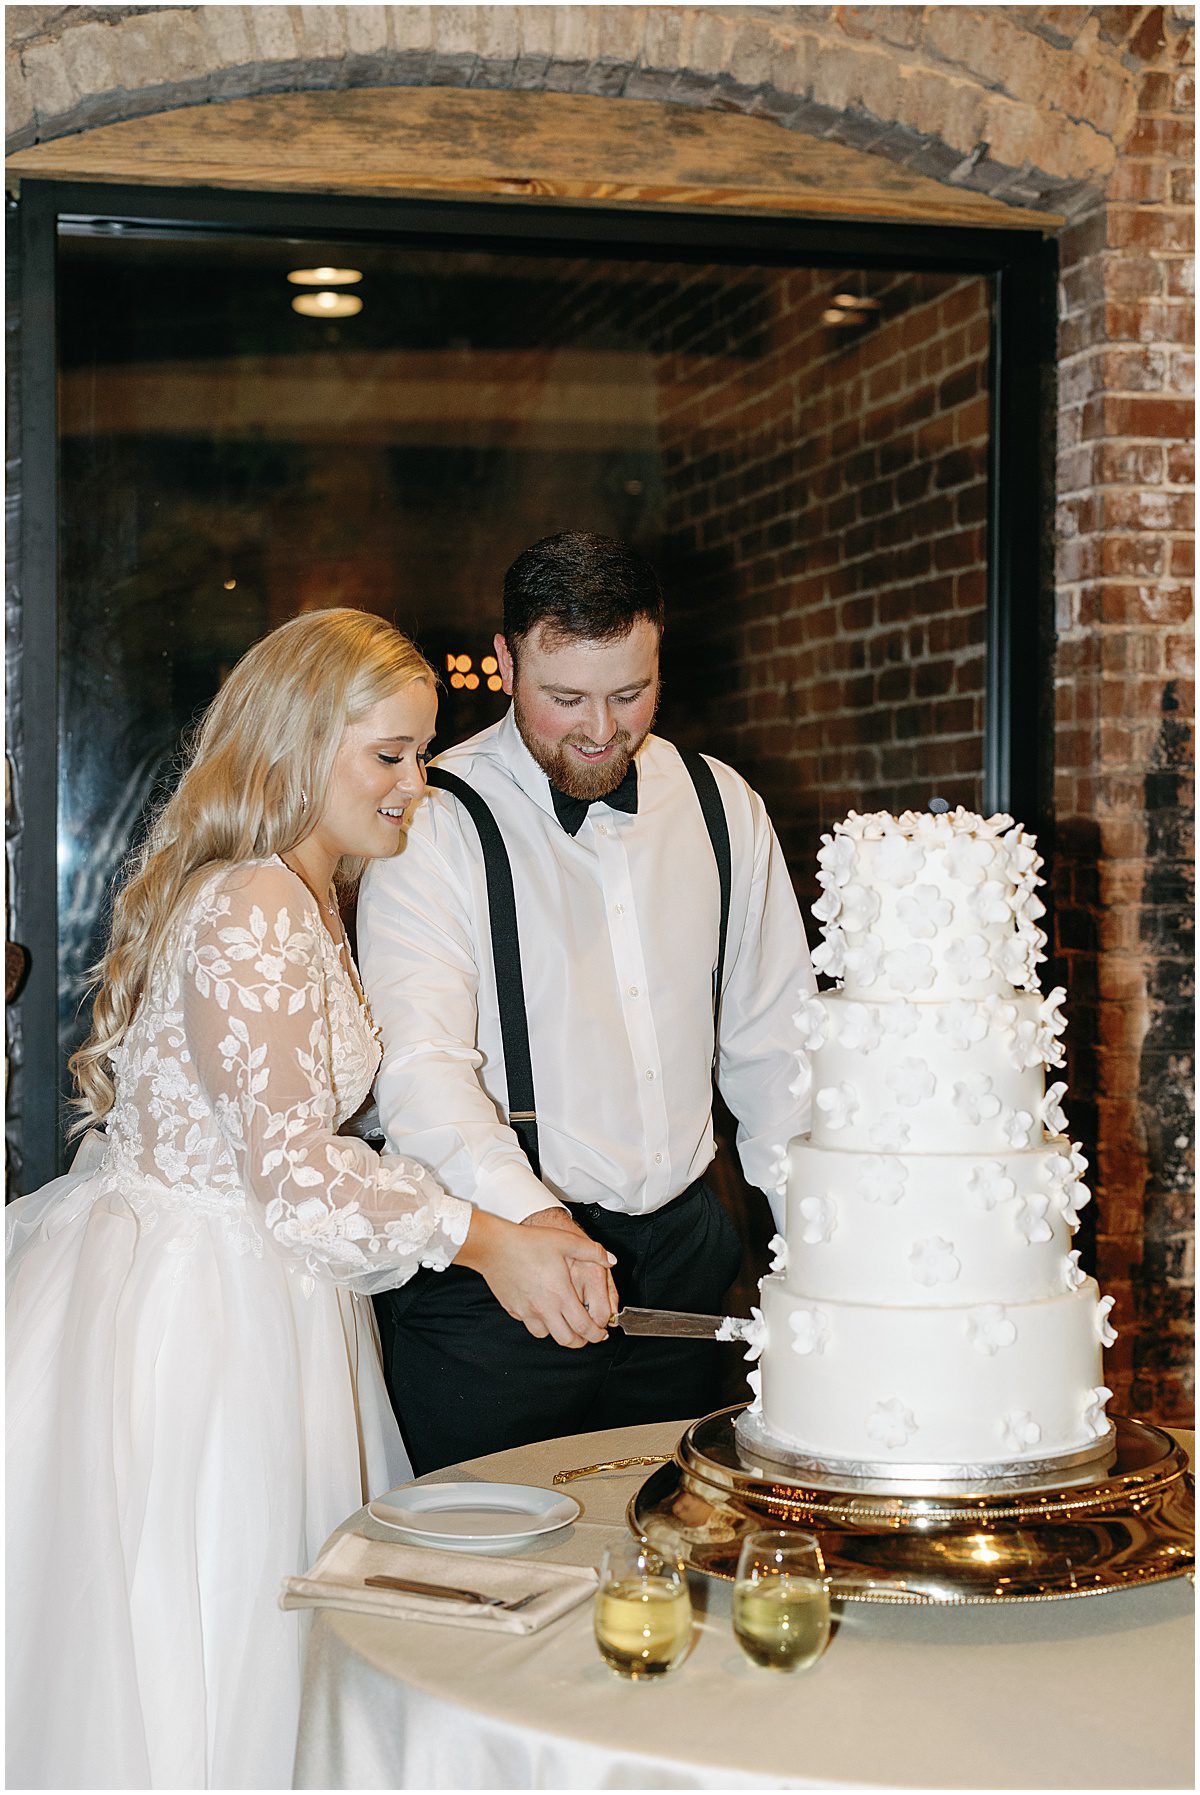 Bride and Groom Cutting cake at Guardian Works Wedding Photo